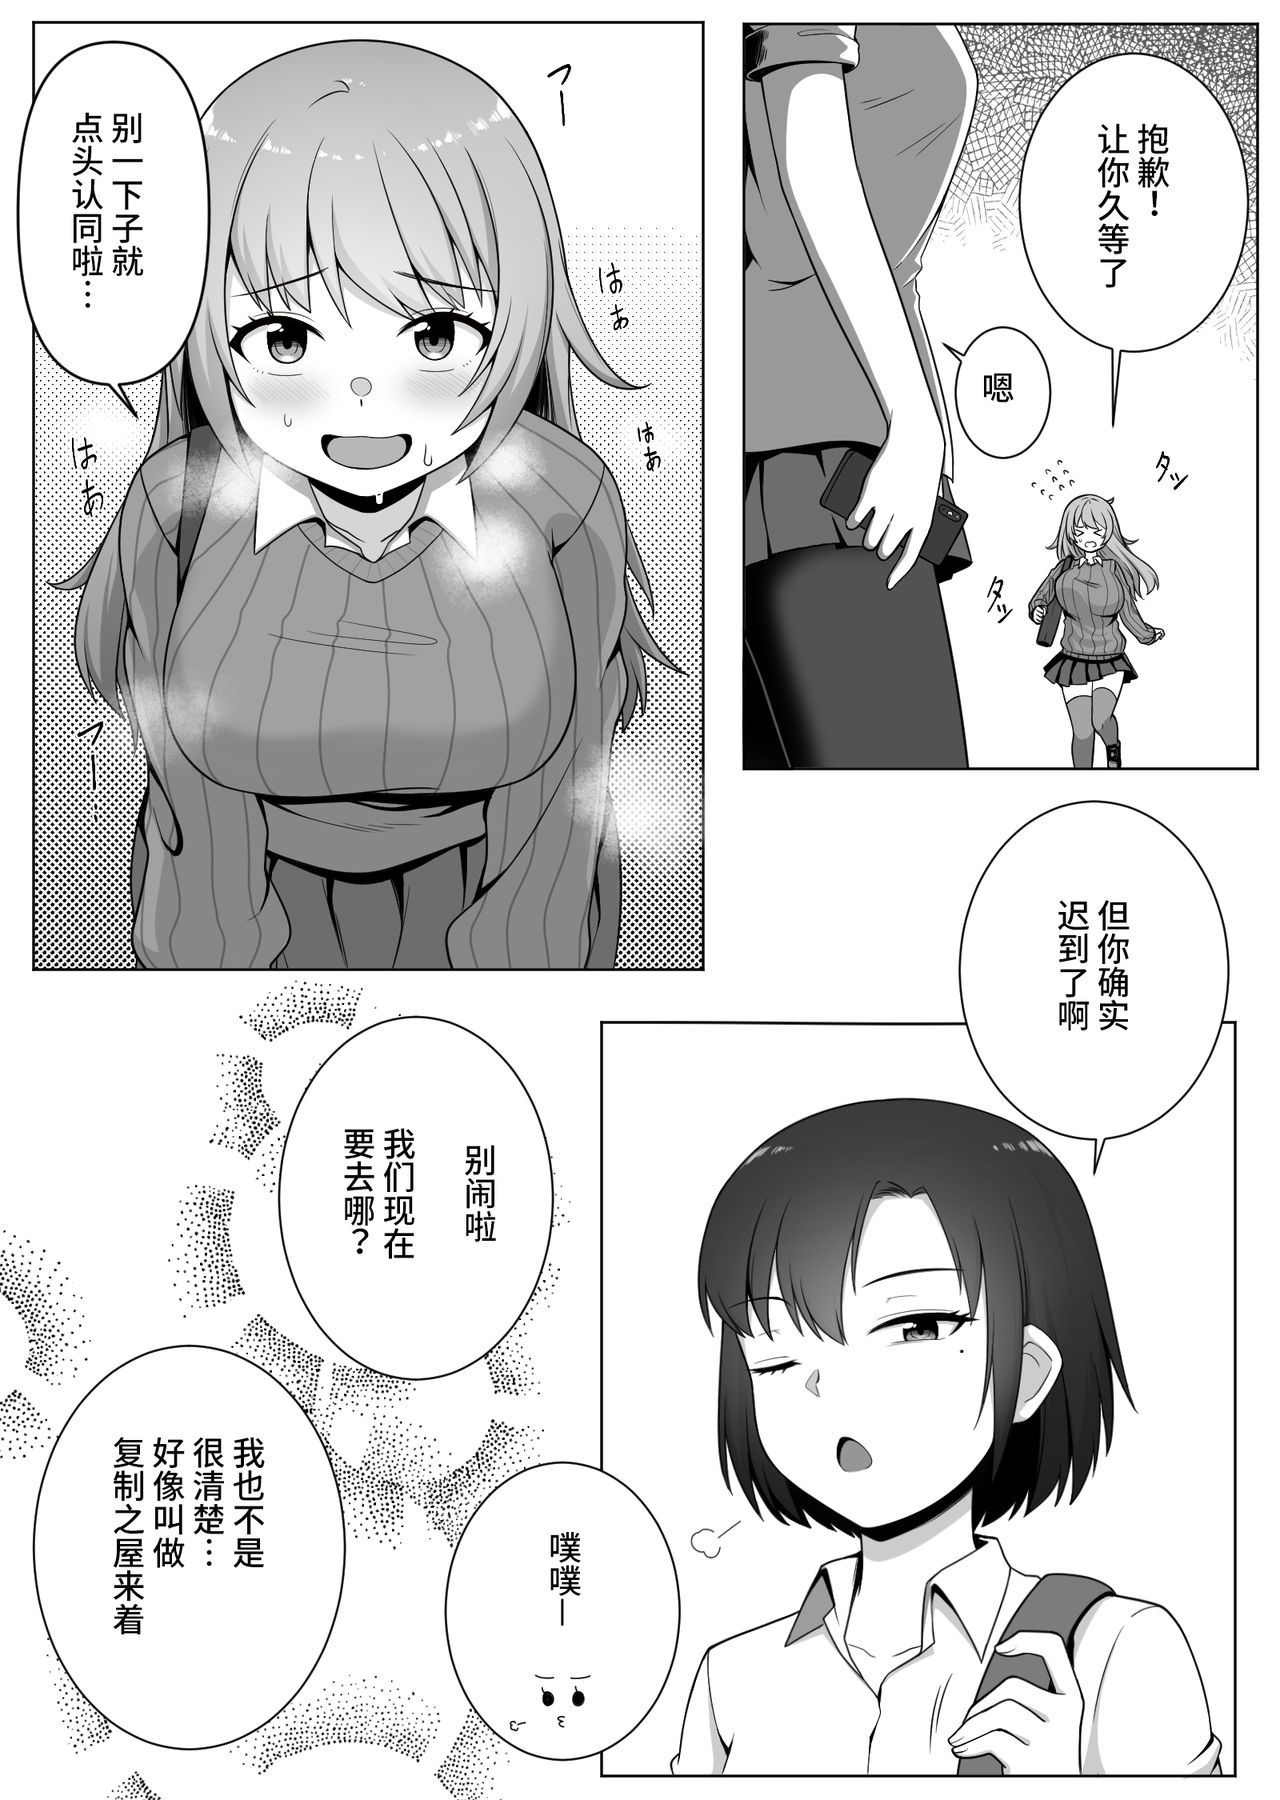 [Xion] Mirror Collection 1 [Chinese] [紫苑汉化组] page 4 full